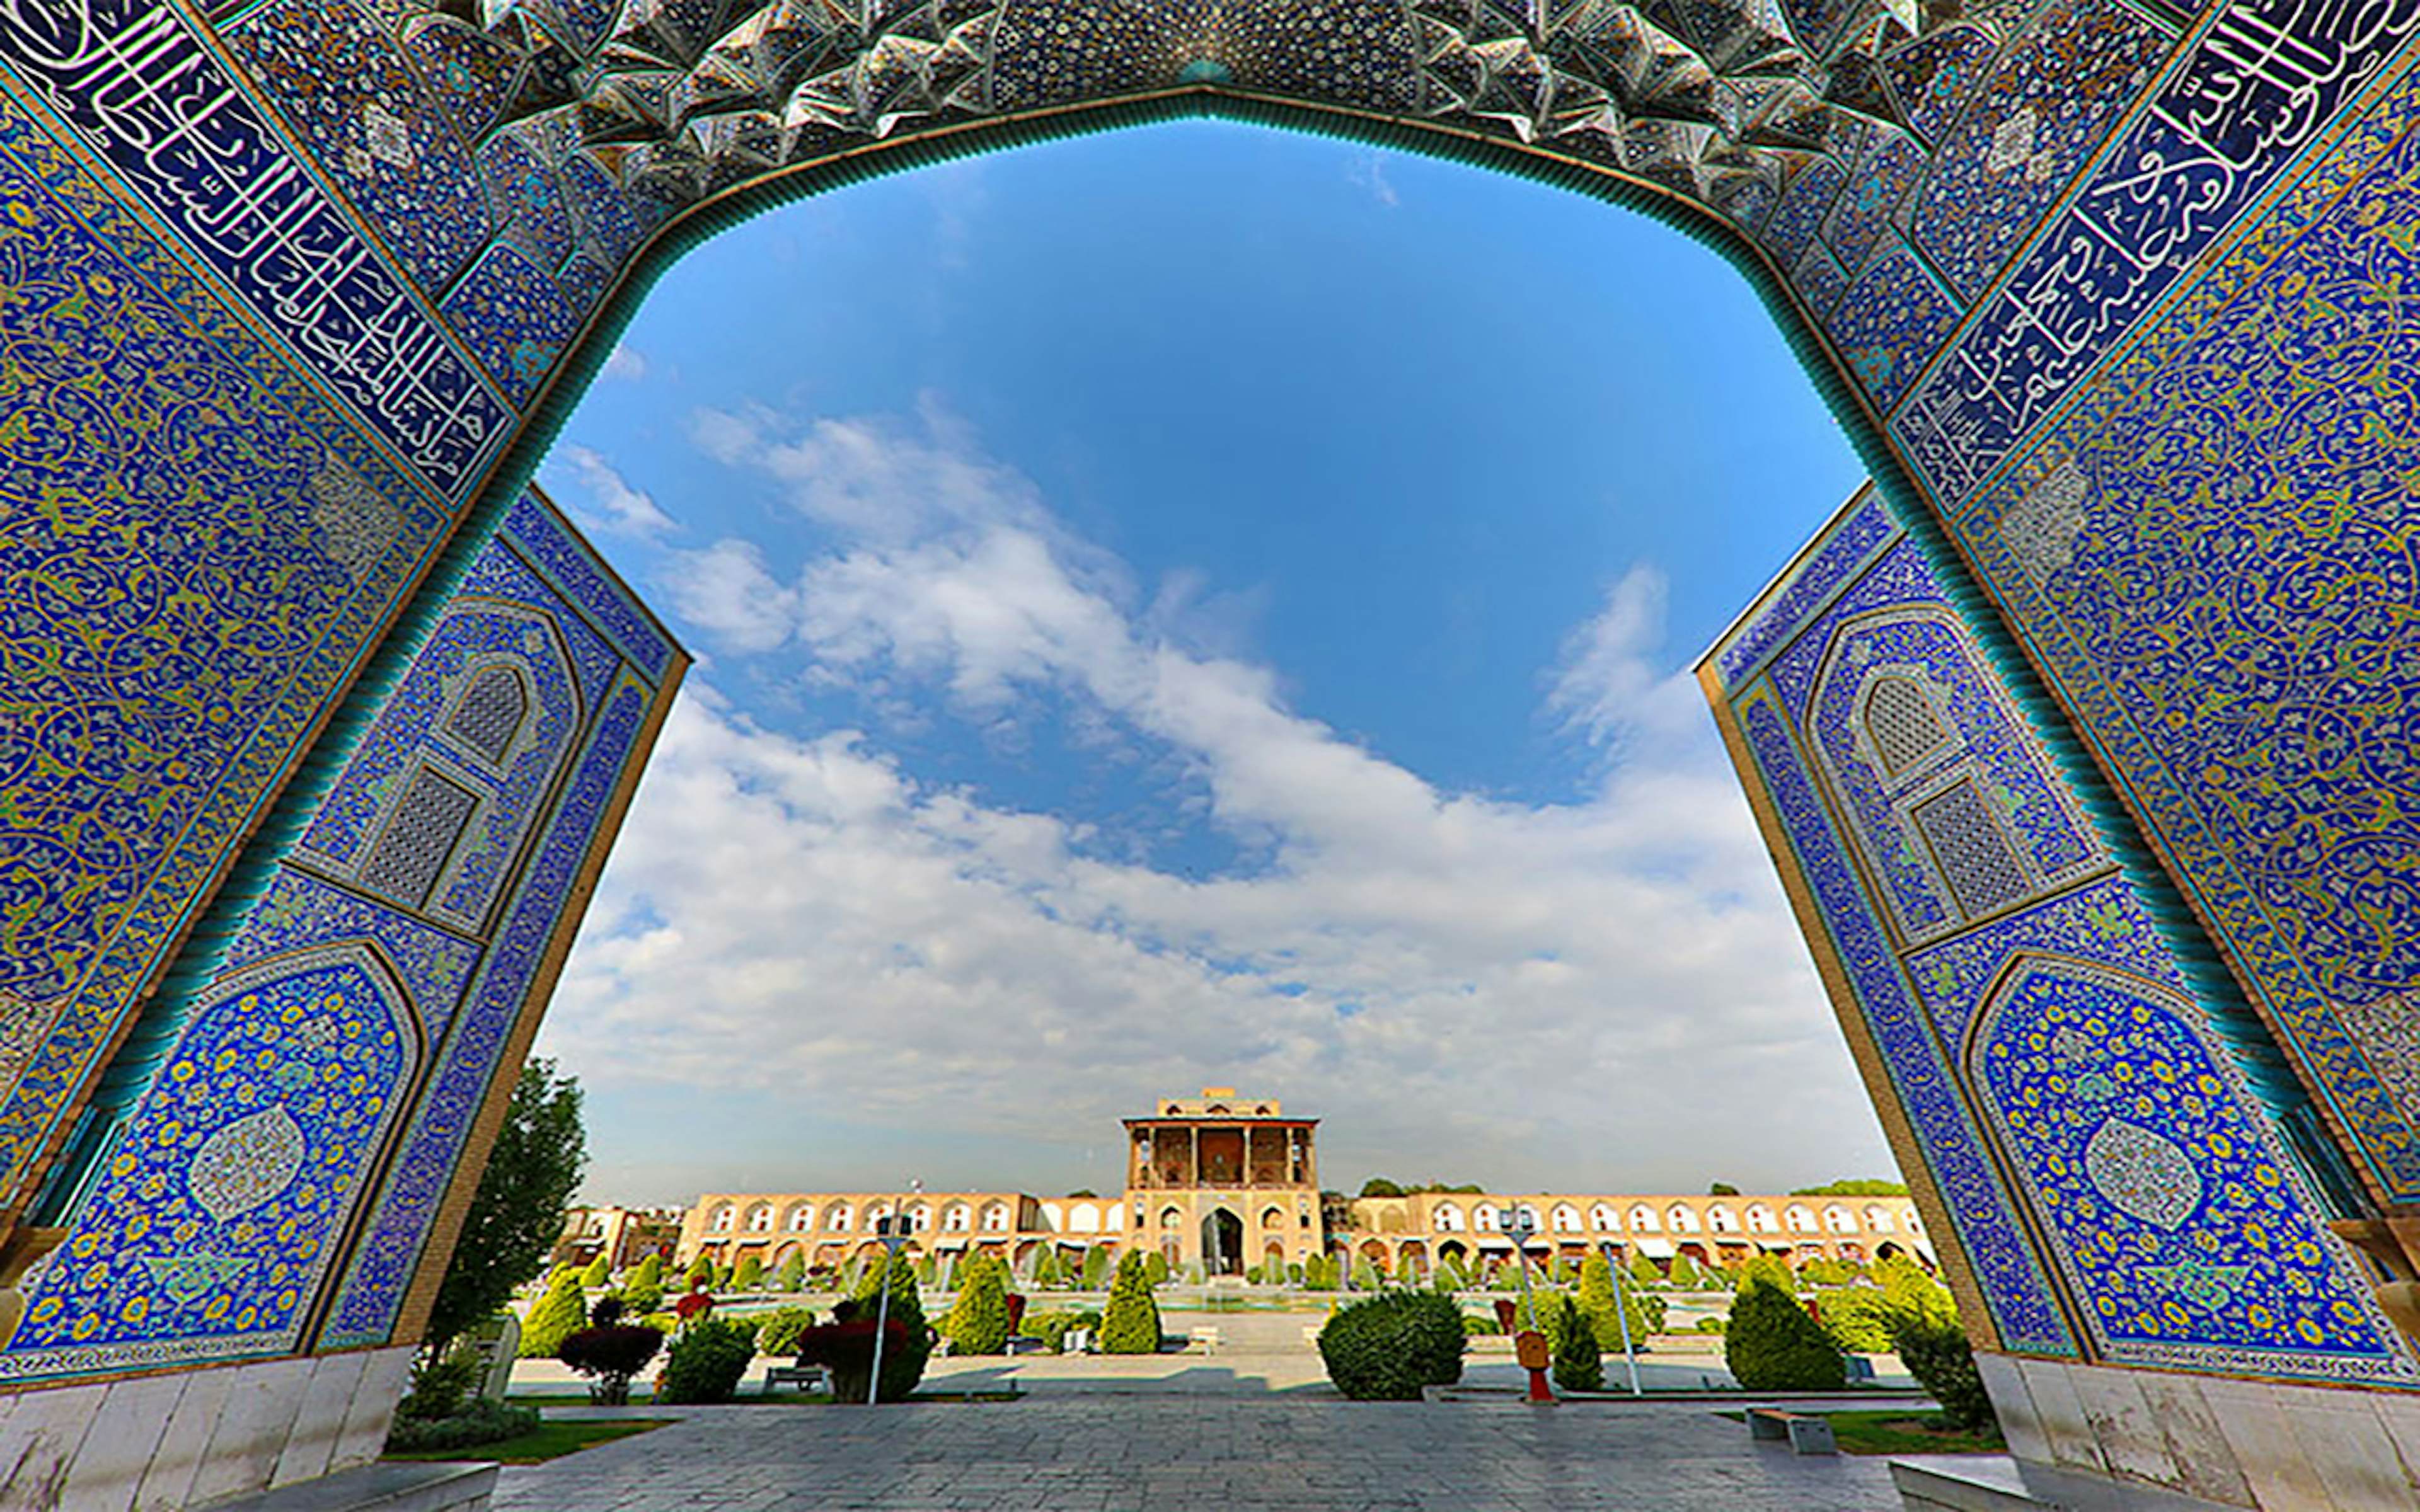 Half of the World: Dark Community Conspiracy in Isfahan image